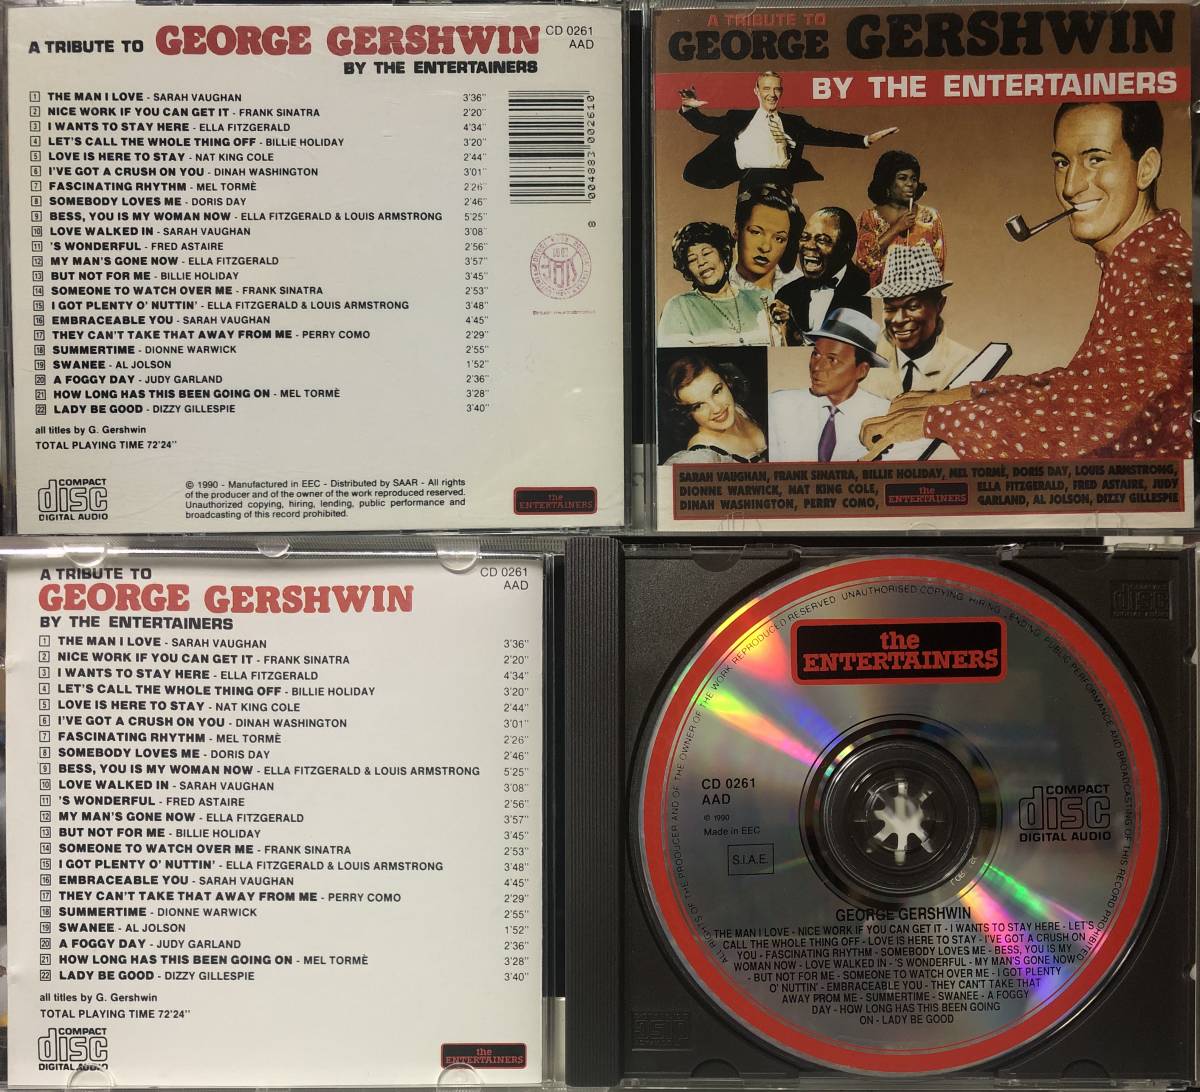 CD3枚 A TRIBUTE TO GEORGE GERSHWIN BY THE ENTERTAINERS & CAPITOL SINGS GERSHWIN (+GERSHWIN'S GREATEST HITS)_画像1